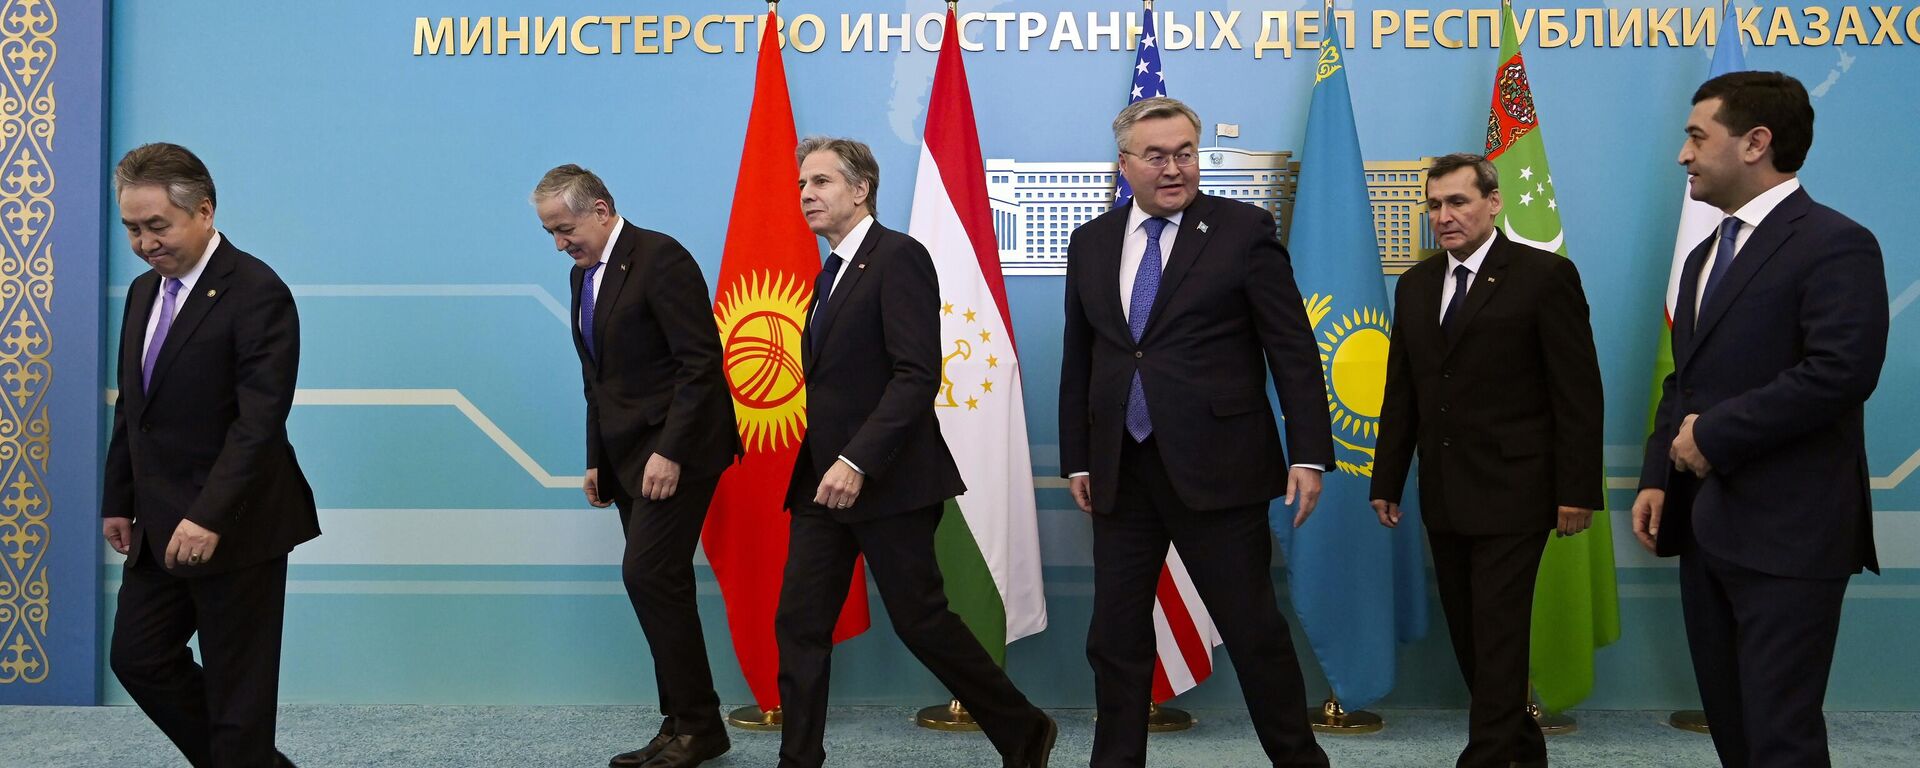 From left: Kyrgyzstan's Foreign Minister Jeenbek Kulubaev, Tajikistan's Foreign Minister Sirojiddin Muhriddin, US Secretary of State Antony Blinken, Kazakhstan's Foreign Minister Mukhtar Tleuberdi, Turkmenistan's Foreign Minister Rashid Meredow and Uzbekistan's Foreign Minister Bakhtiyor Saidov participate in the US-Central Asia (C5+1) foreign ministerial meeting at the Ministry of Foreign Affairs in Astana , Kazakhstan, Tuesday, Feb. 28, 2023. - Sputnik International, 1920, 01.03.2023